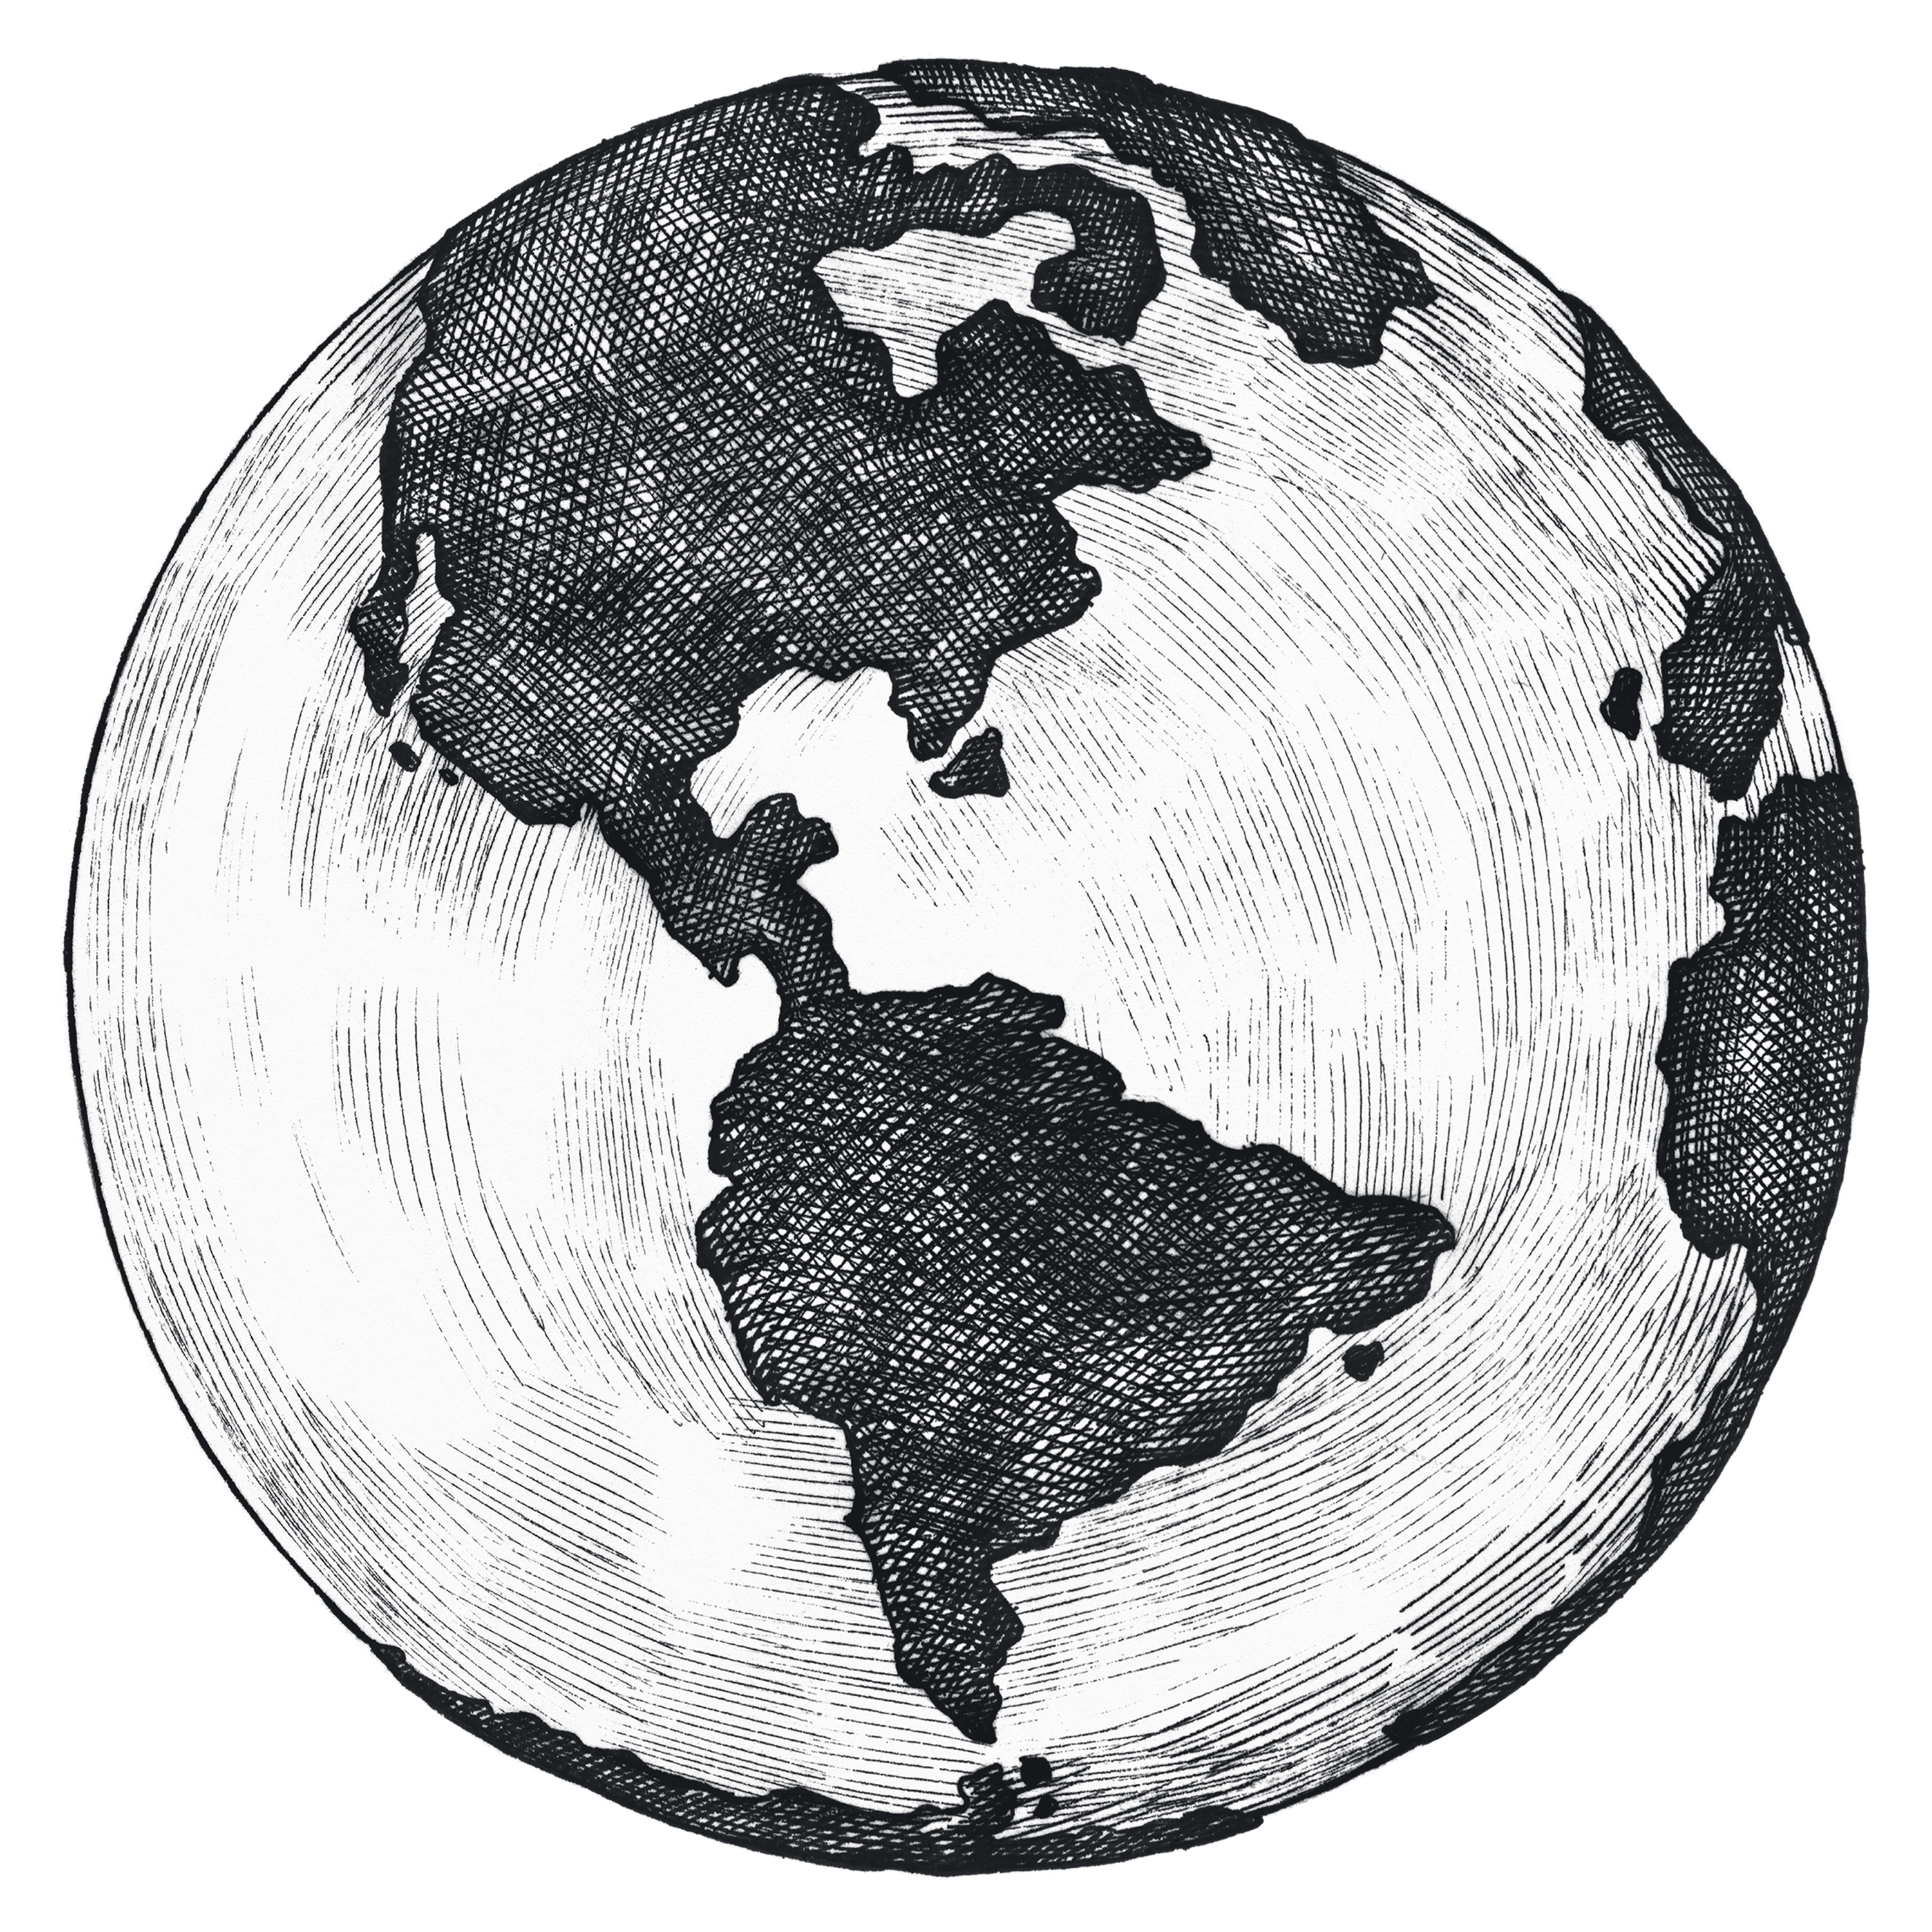 A black and white doodled globe